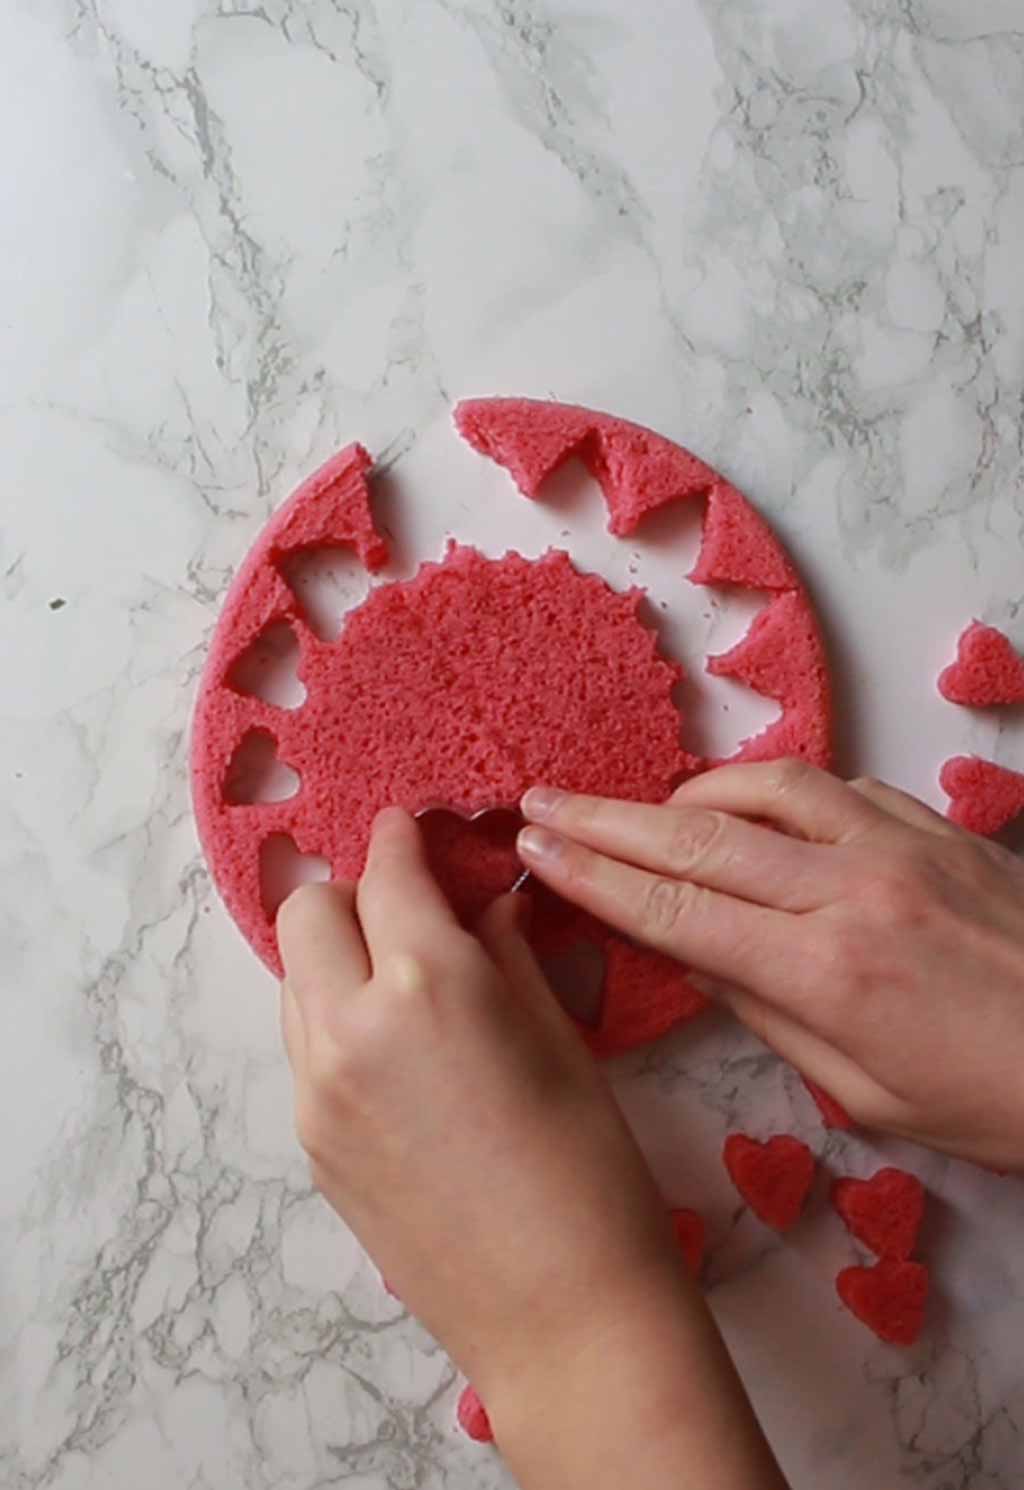 Cutting Heart Shapes Out Of Pink Cake